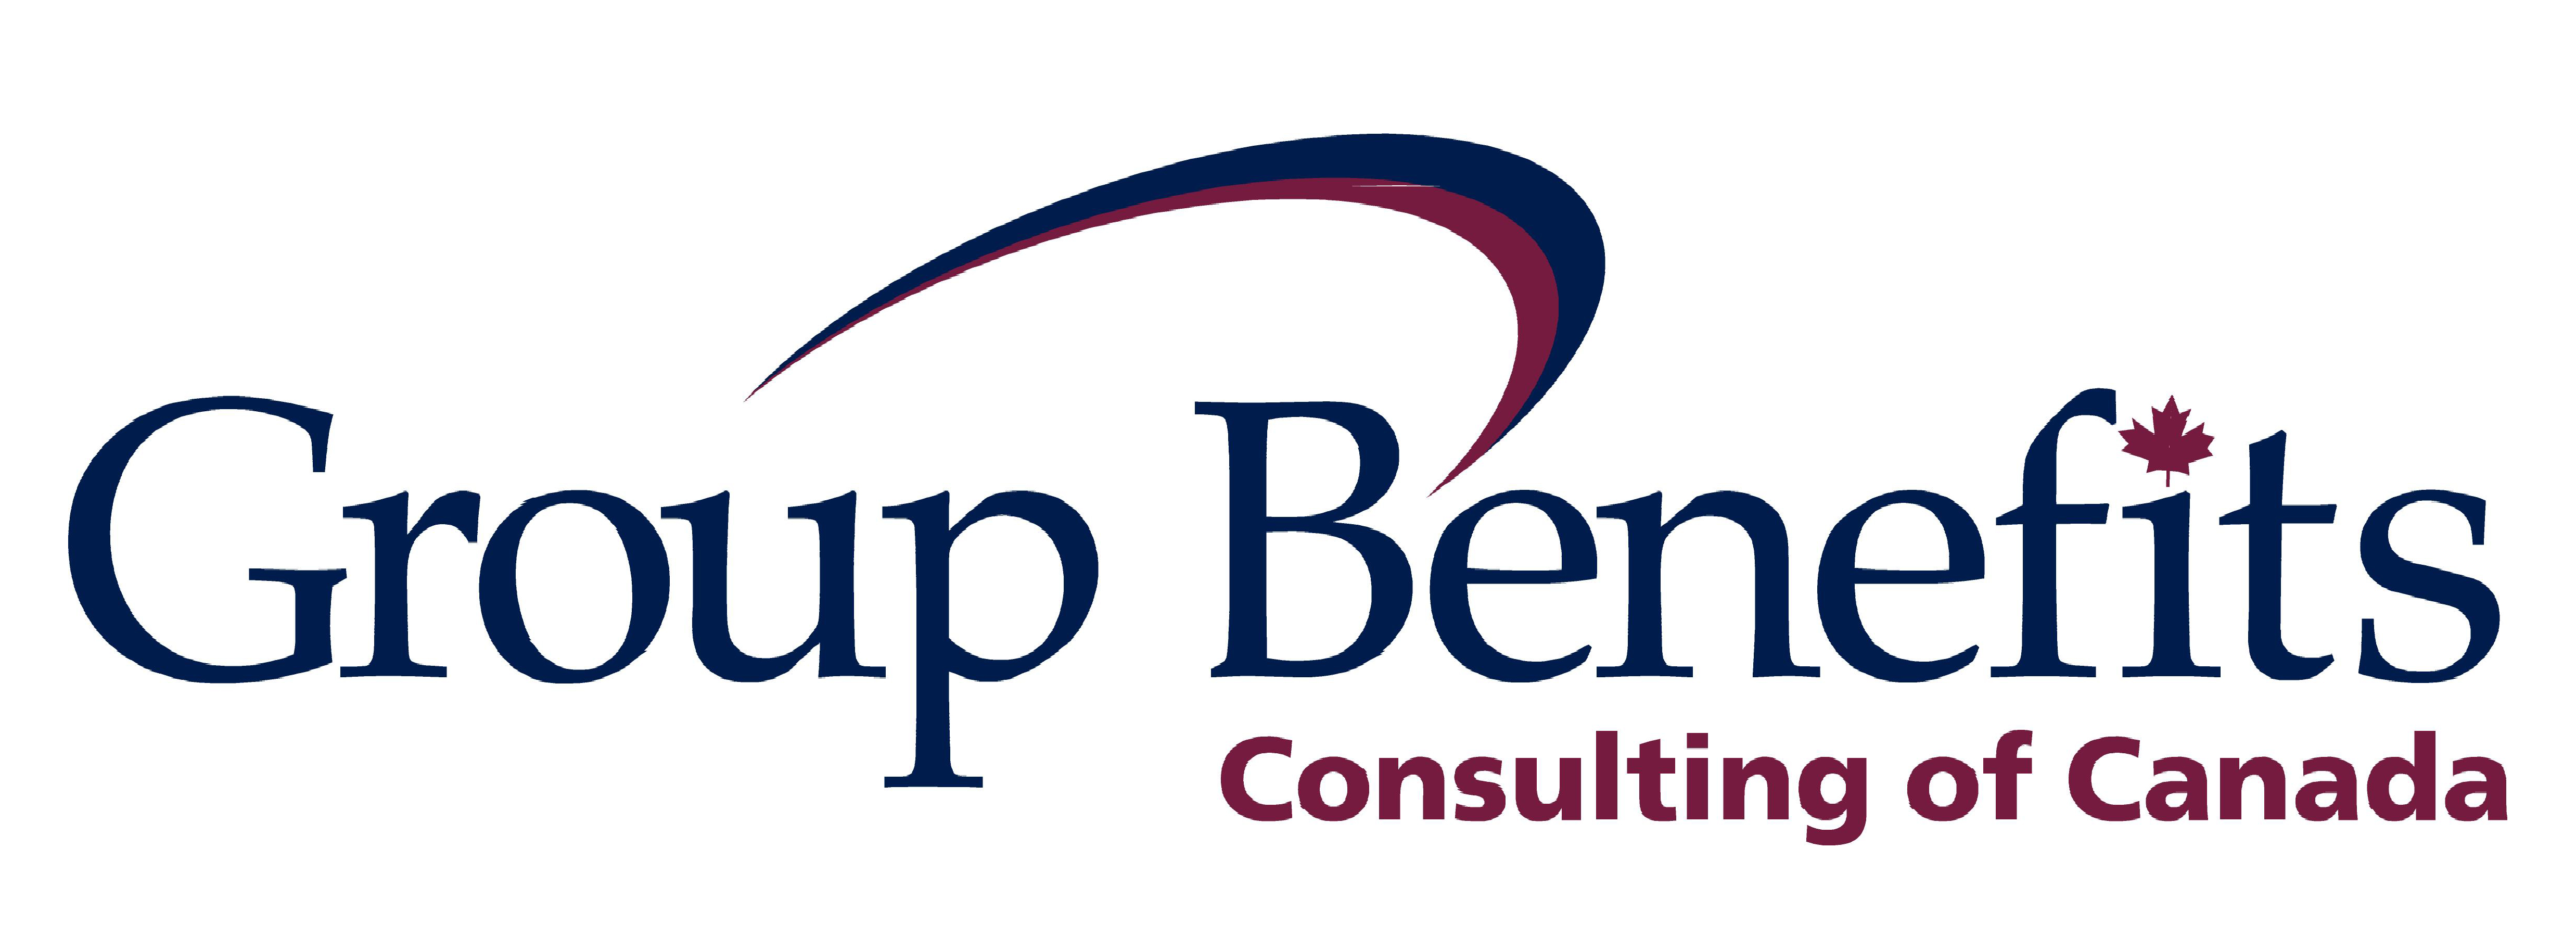 Group Benefits Consulting of Canada logo